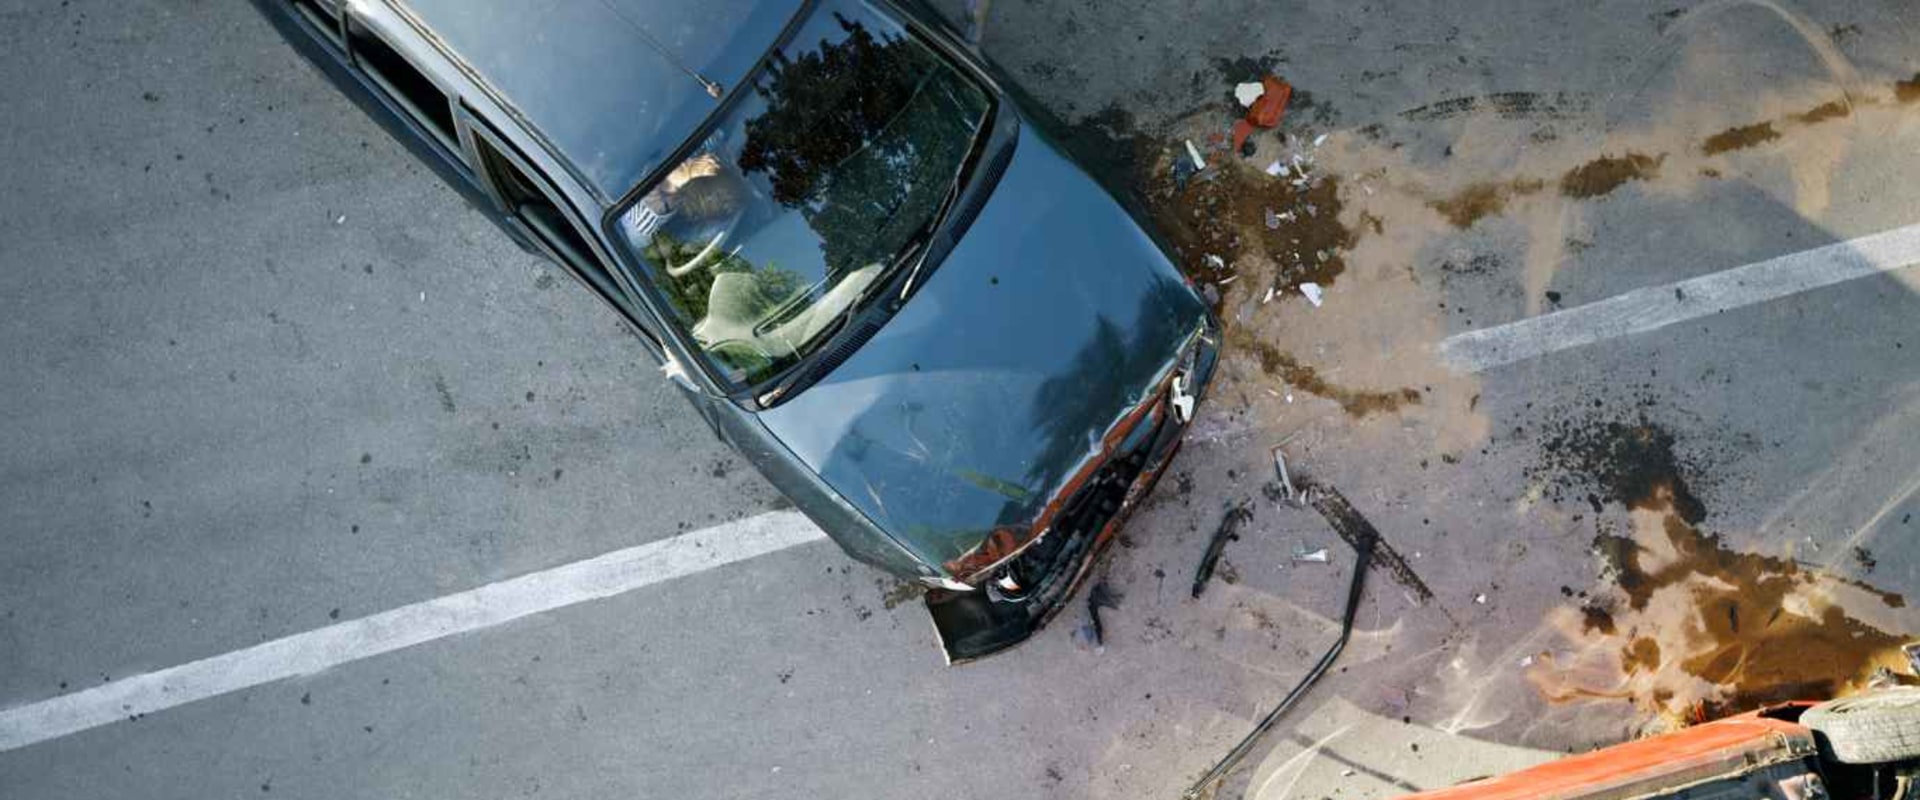 The Lengthy Process of Settling a Car Accident Claim